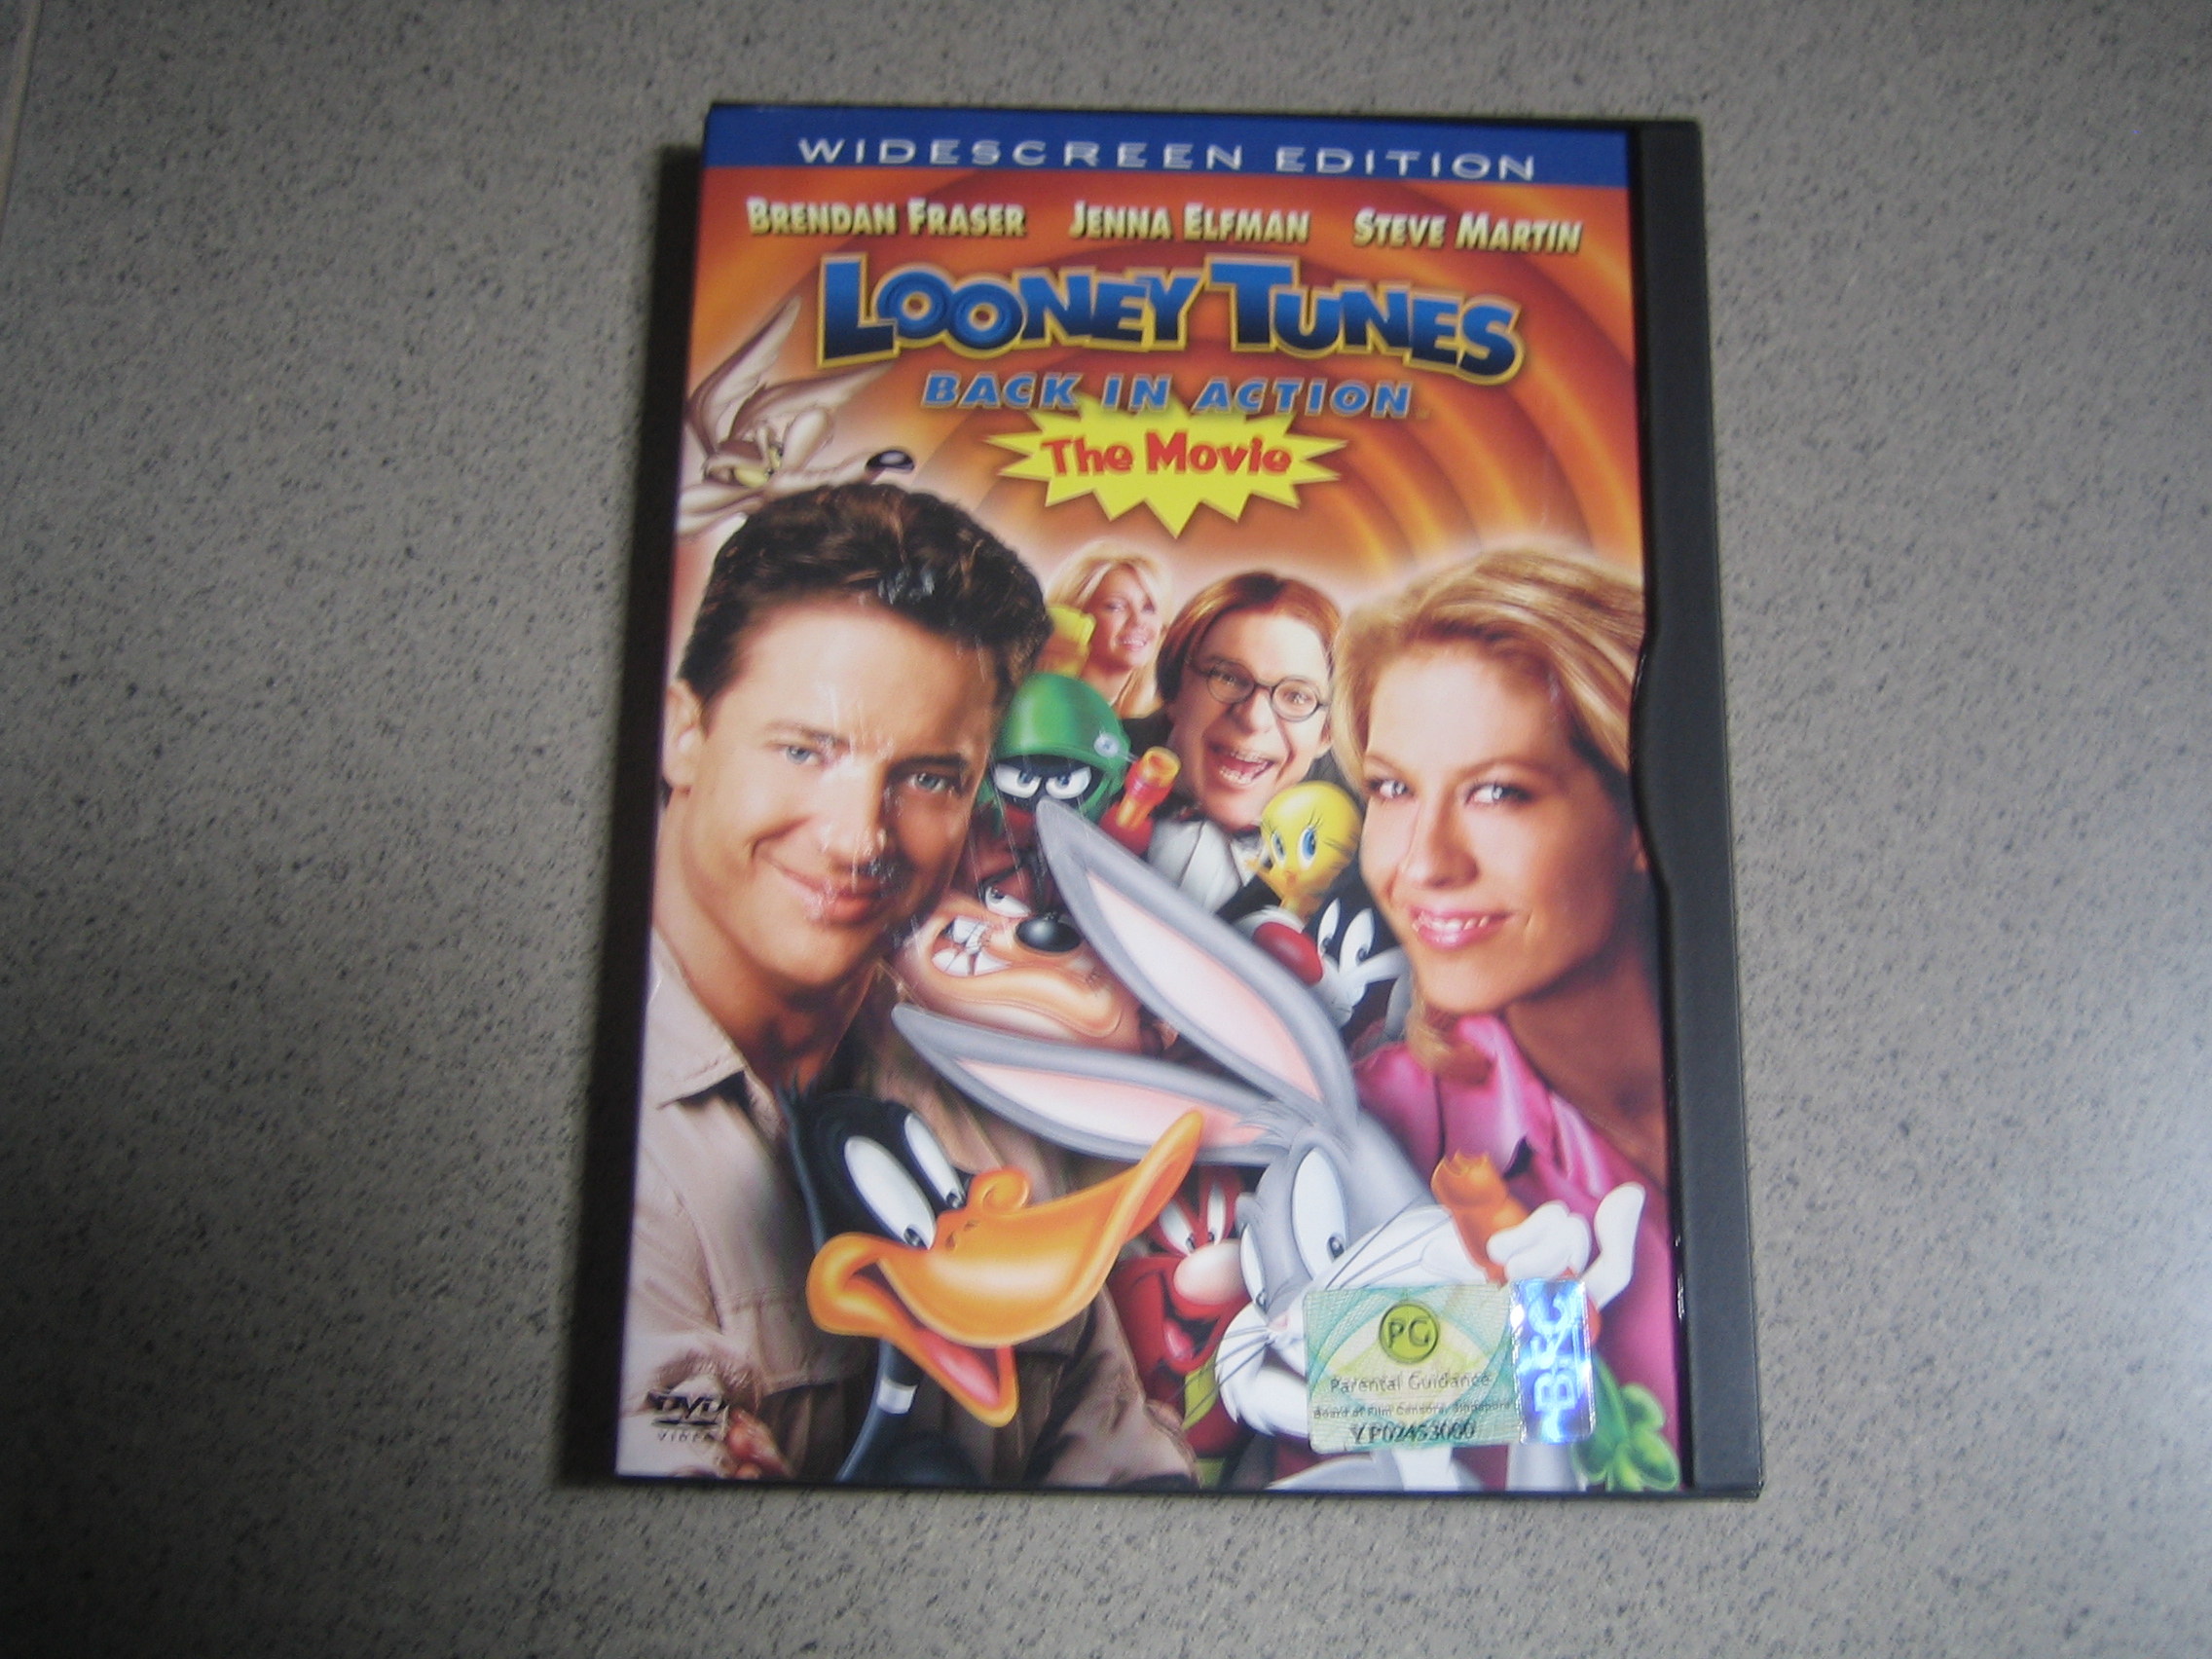 Looney Tunes Back In Action Dvd Movie Title 5 6 Sale Music